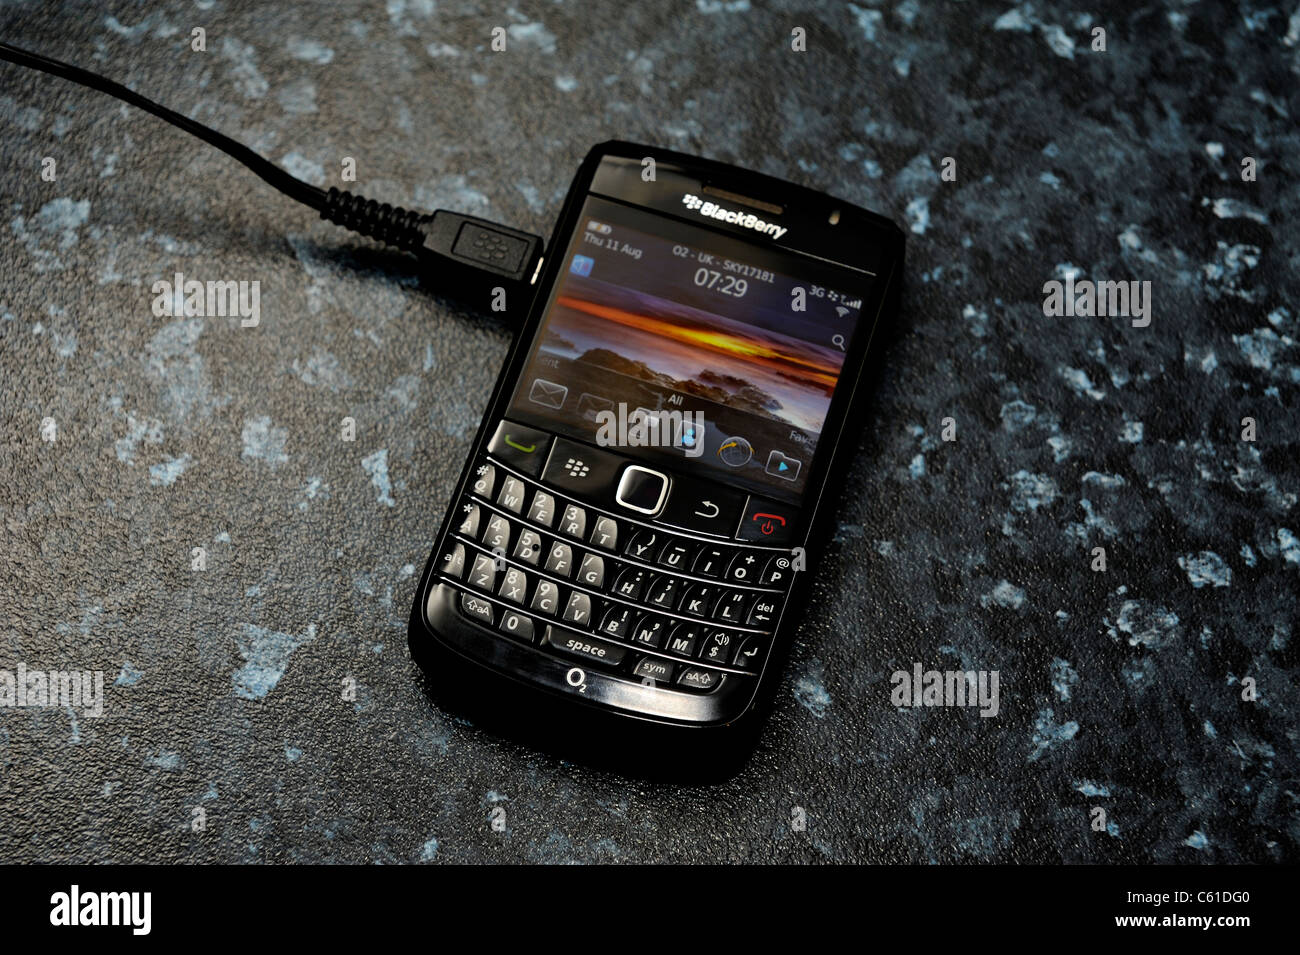 blackberry bold mobile phone on charge Stock Photo